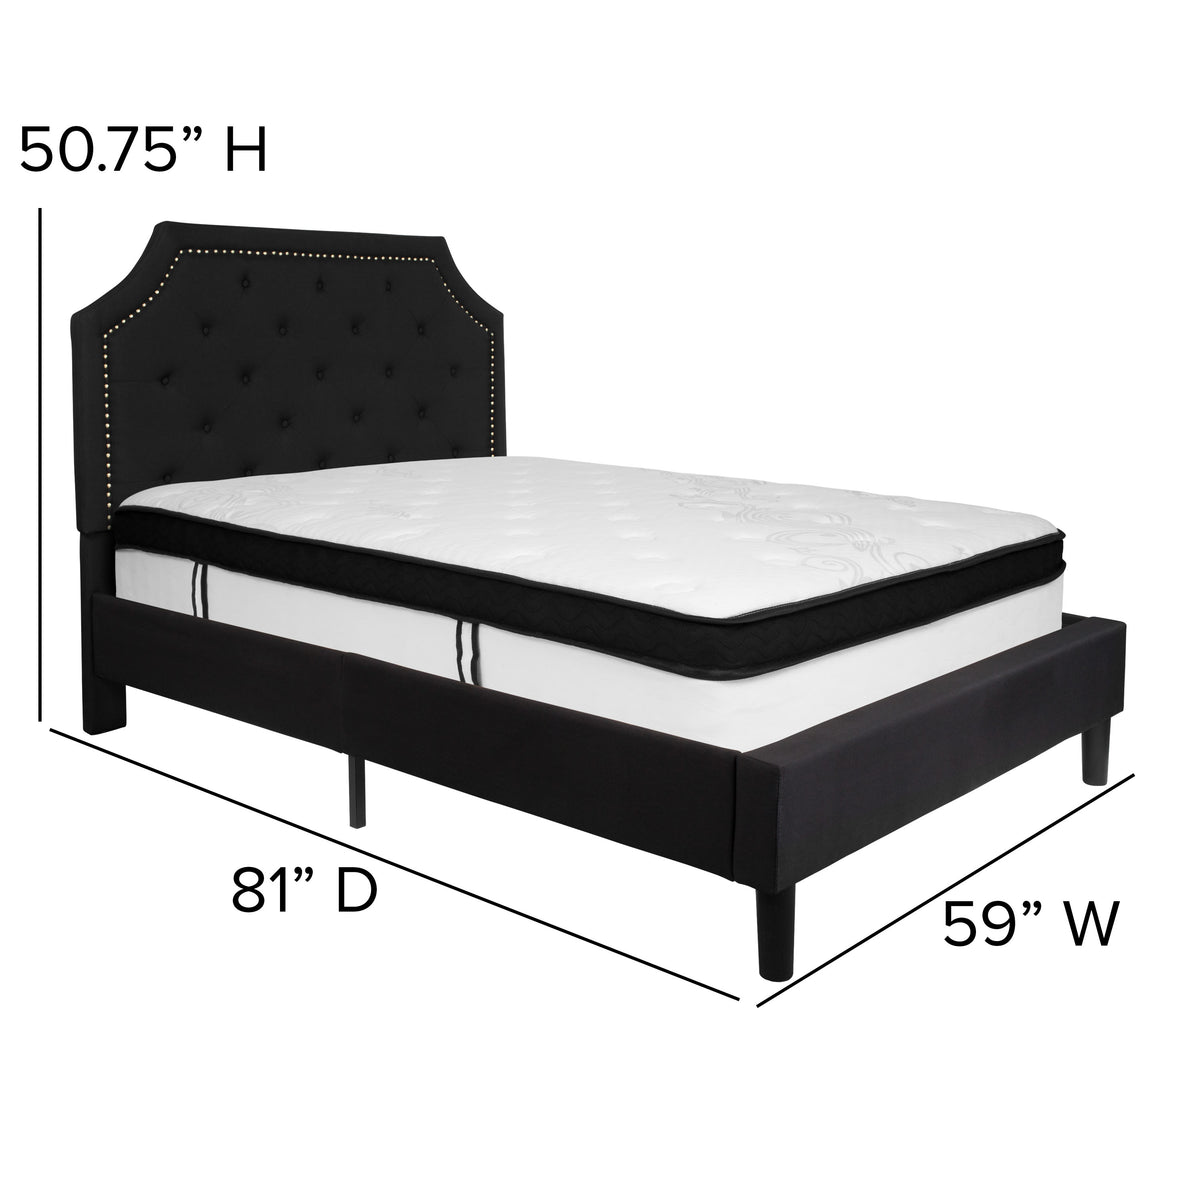 Black,Full |#| Full Size Arched Tufted Black Fabric Platform Bed with Memory Foam Mattress